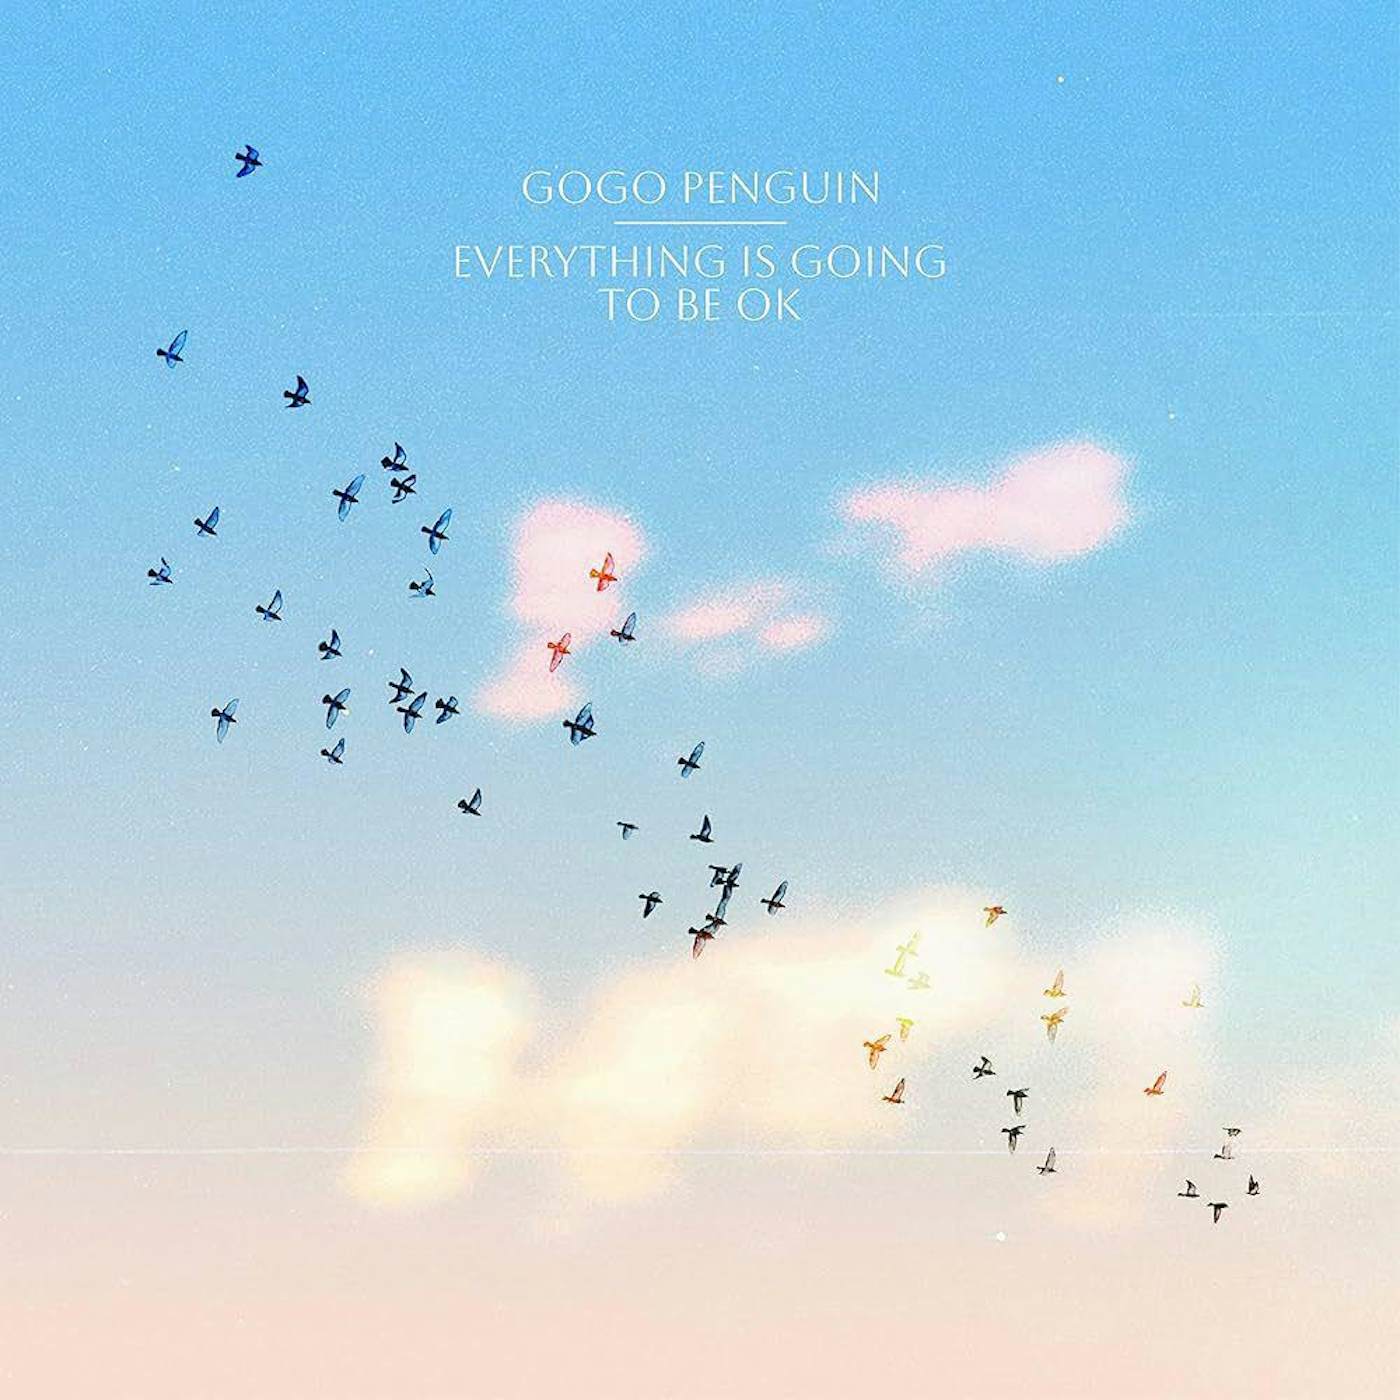 GoGo Penguin EVERYTHING IS GOING TO BE OK Vinyl Record